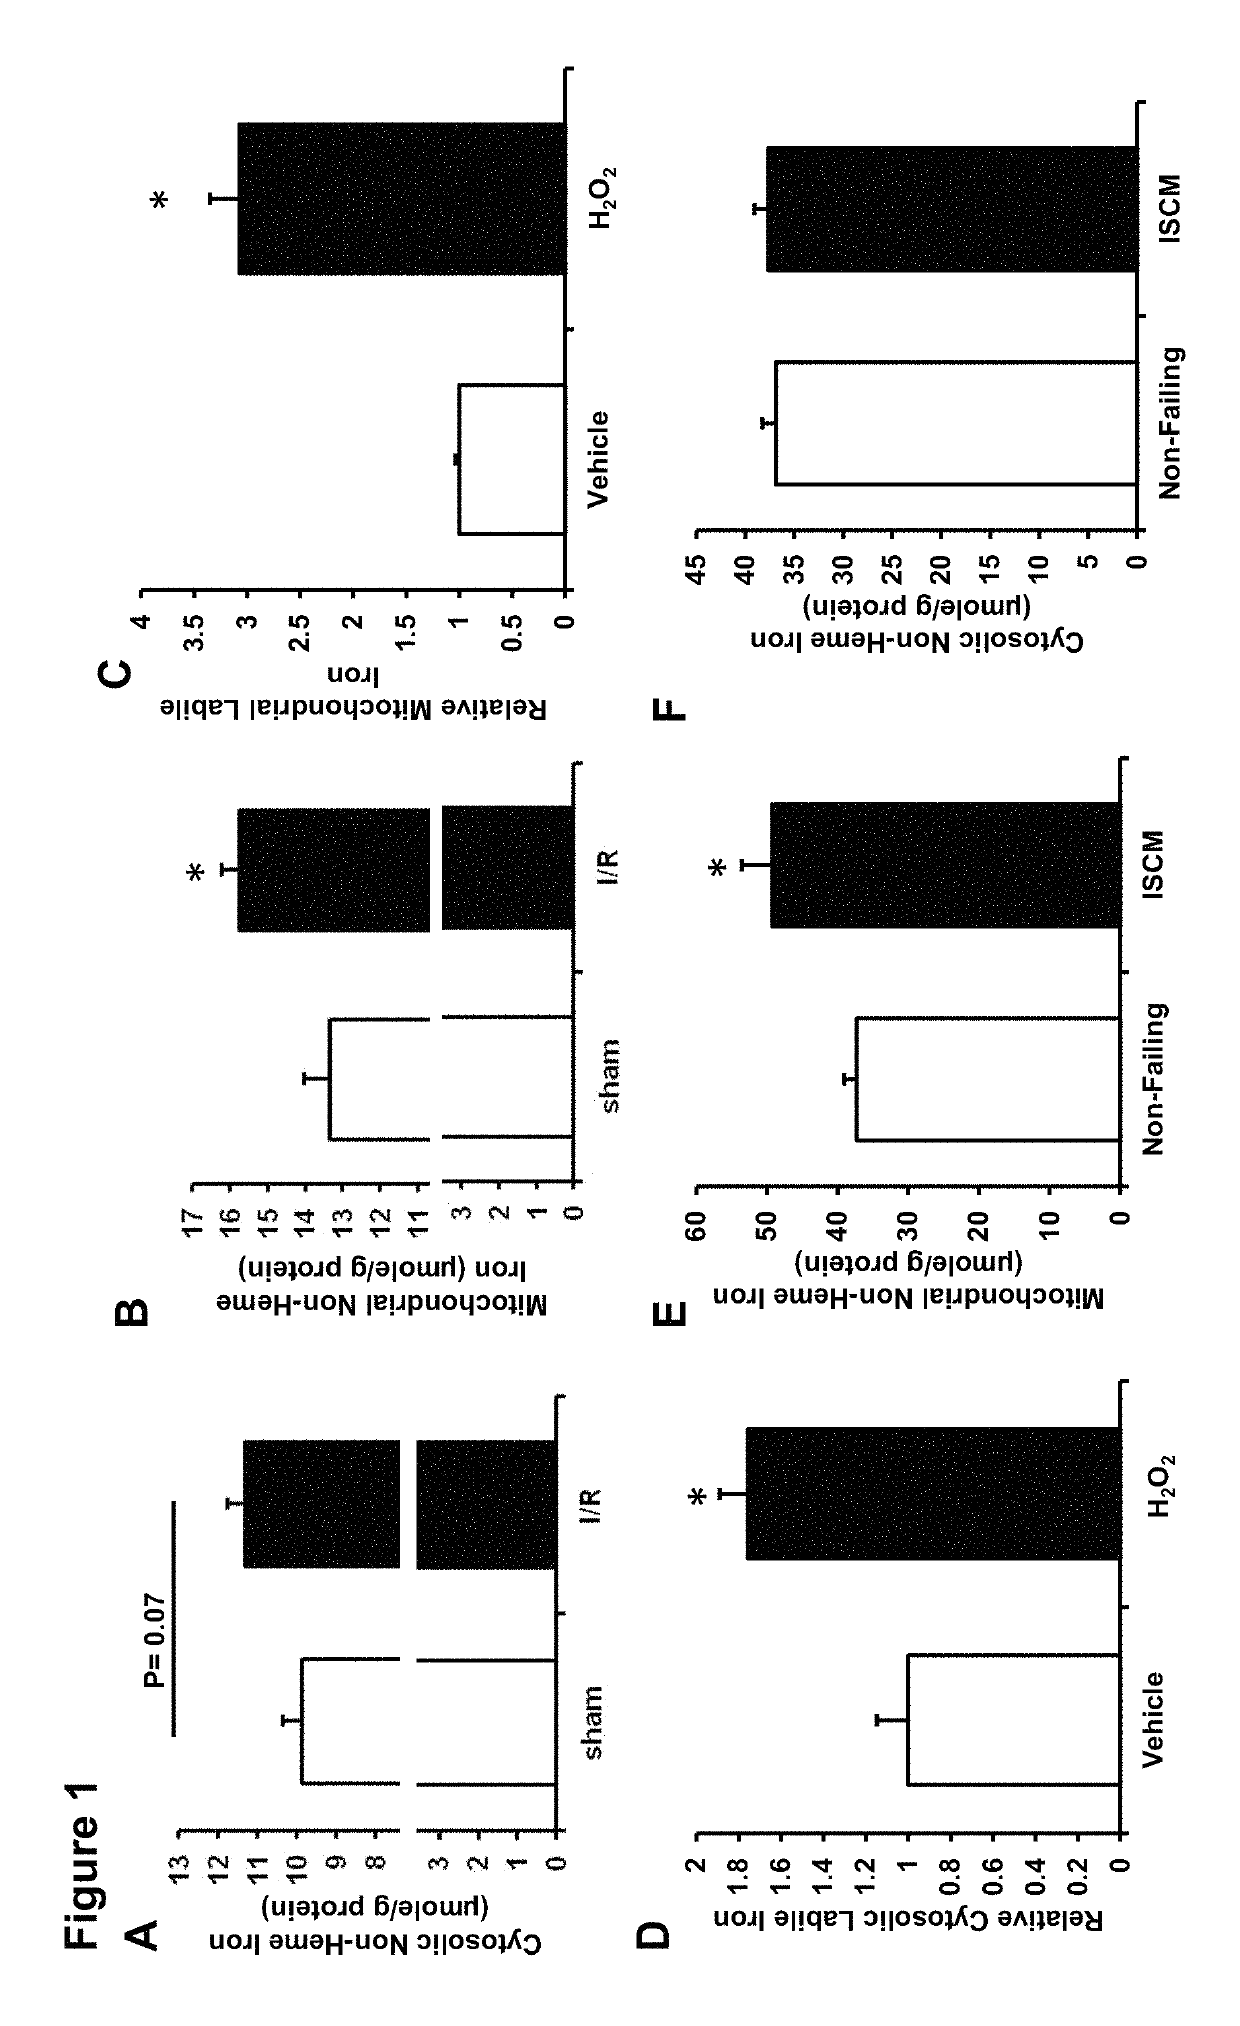 Mitochondrial lipid permeable iron chelators for treating and preventing ischemia/reperfusion (I/R) injury in the heart following an ischemic event